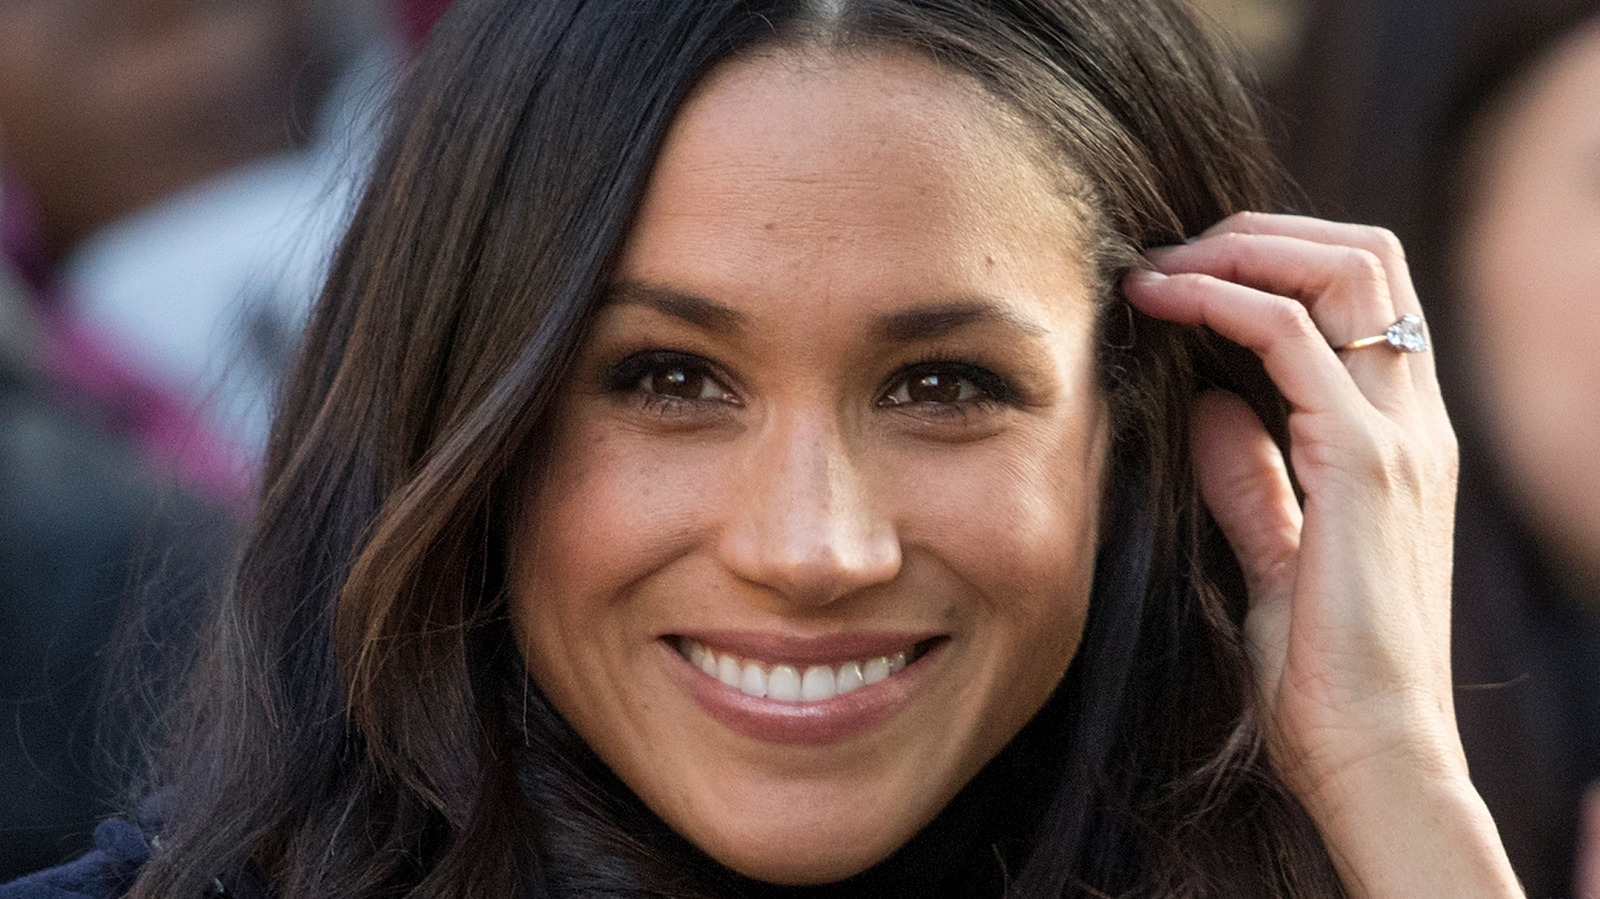 Why Meghan Markle's Shoutout To Her First Job Is Causing A Stir